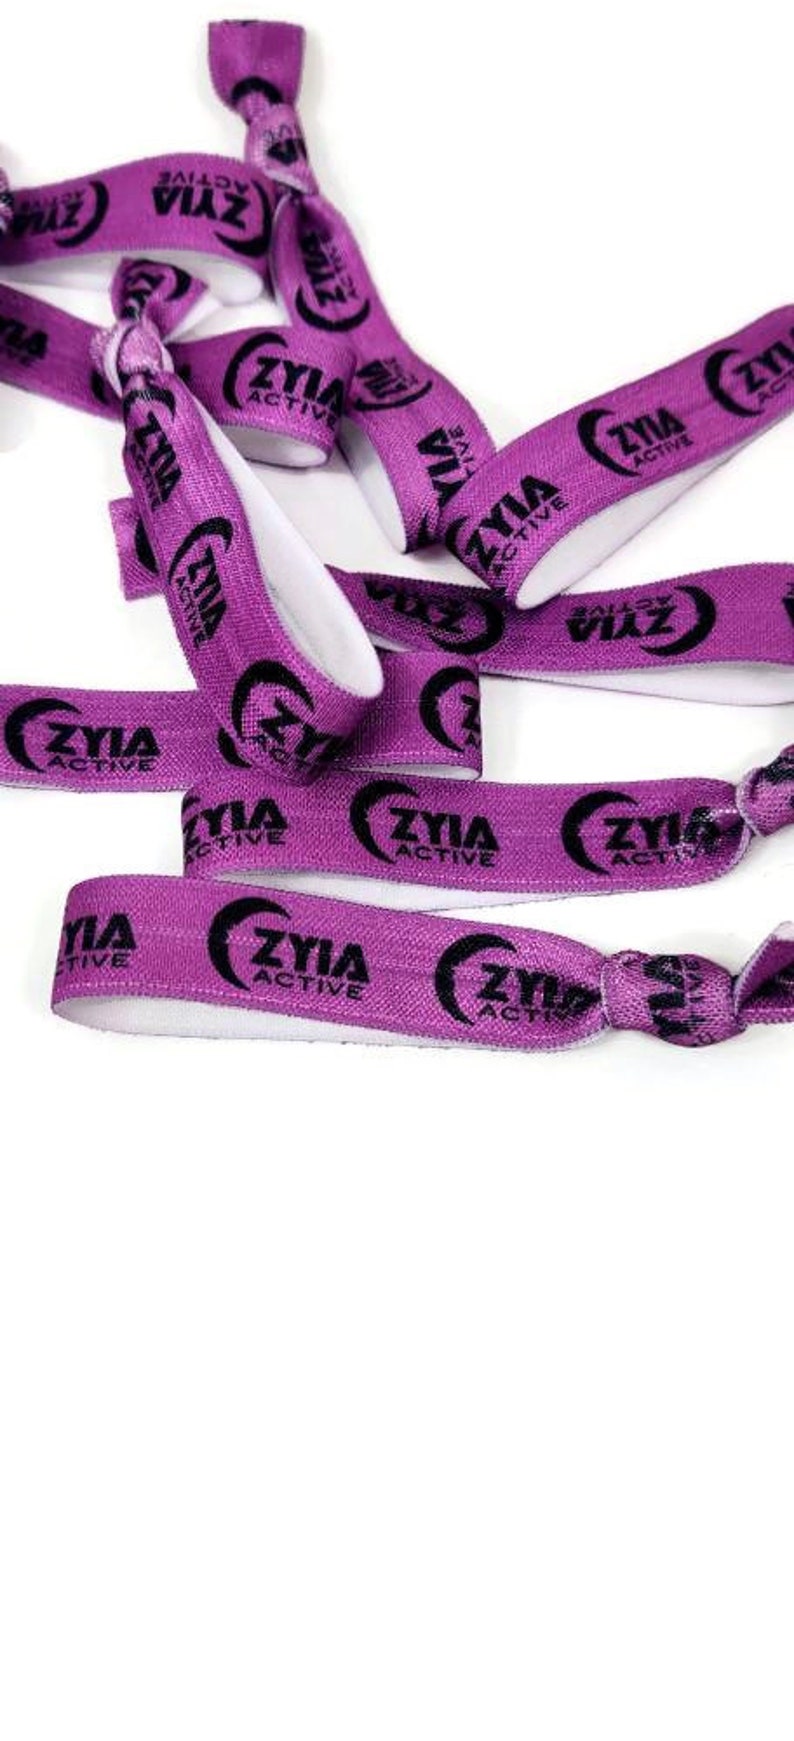 5, 10, 25, 50 ties ZYIA ACTIVE 4 colors available Black, White, Purple, Lime Green Hair ties, bracelets, elastic bands. Gift, favor image 6